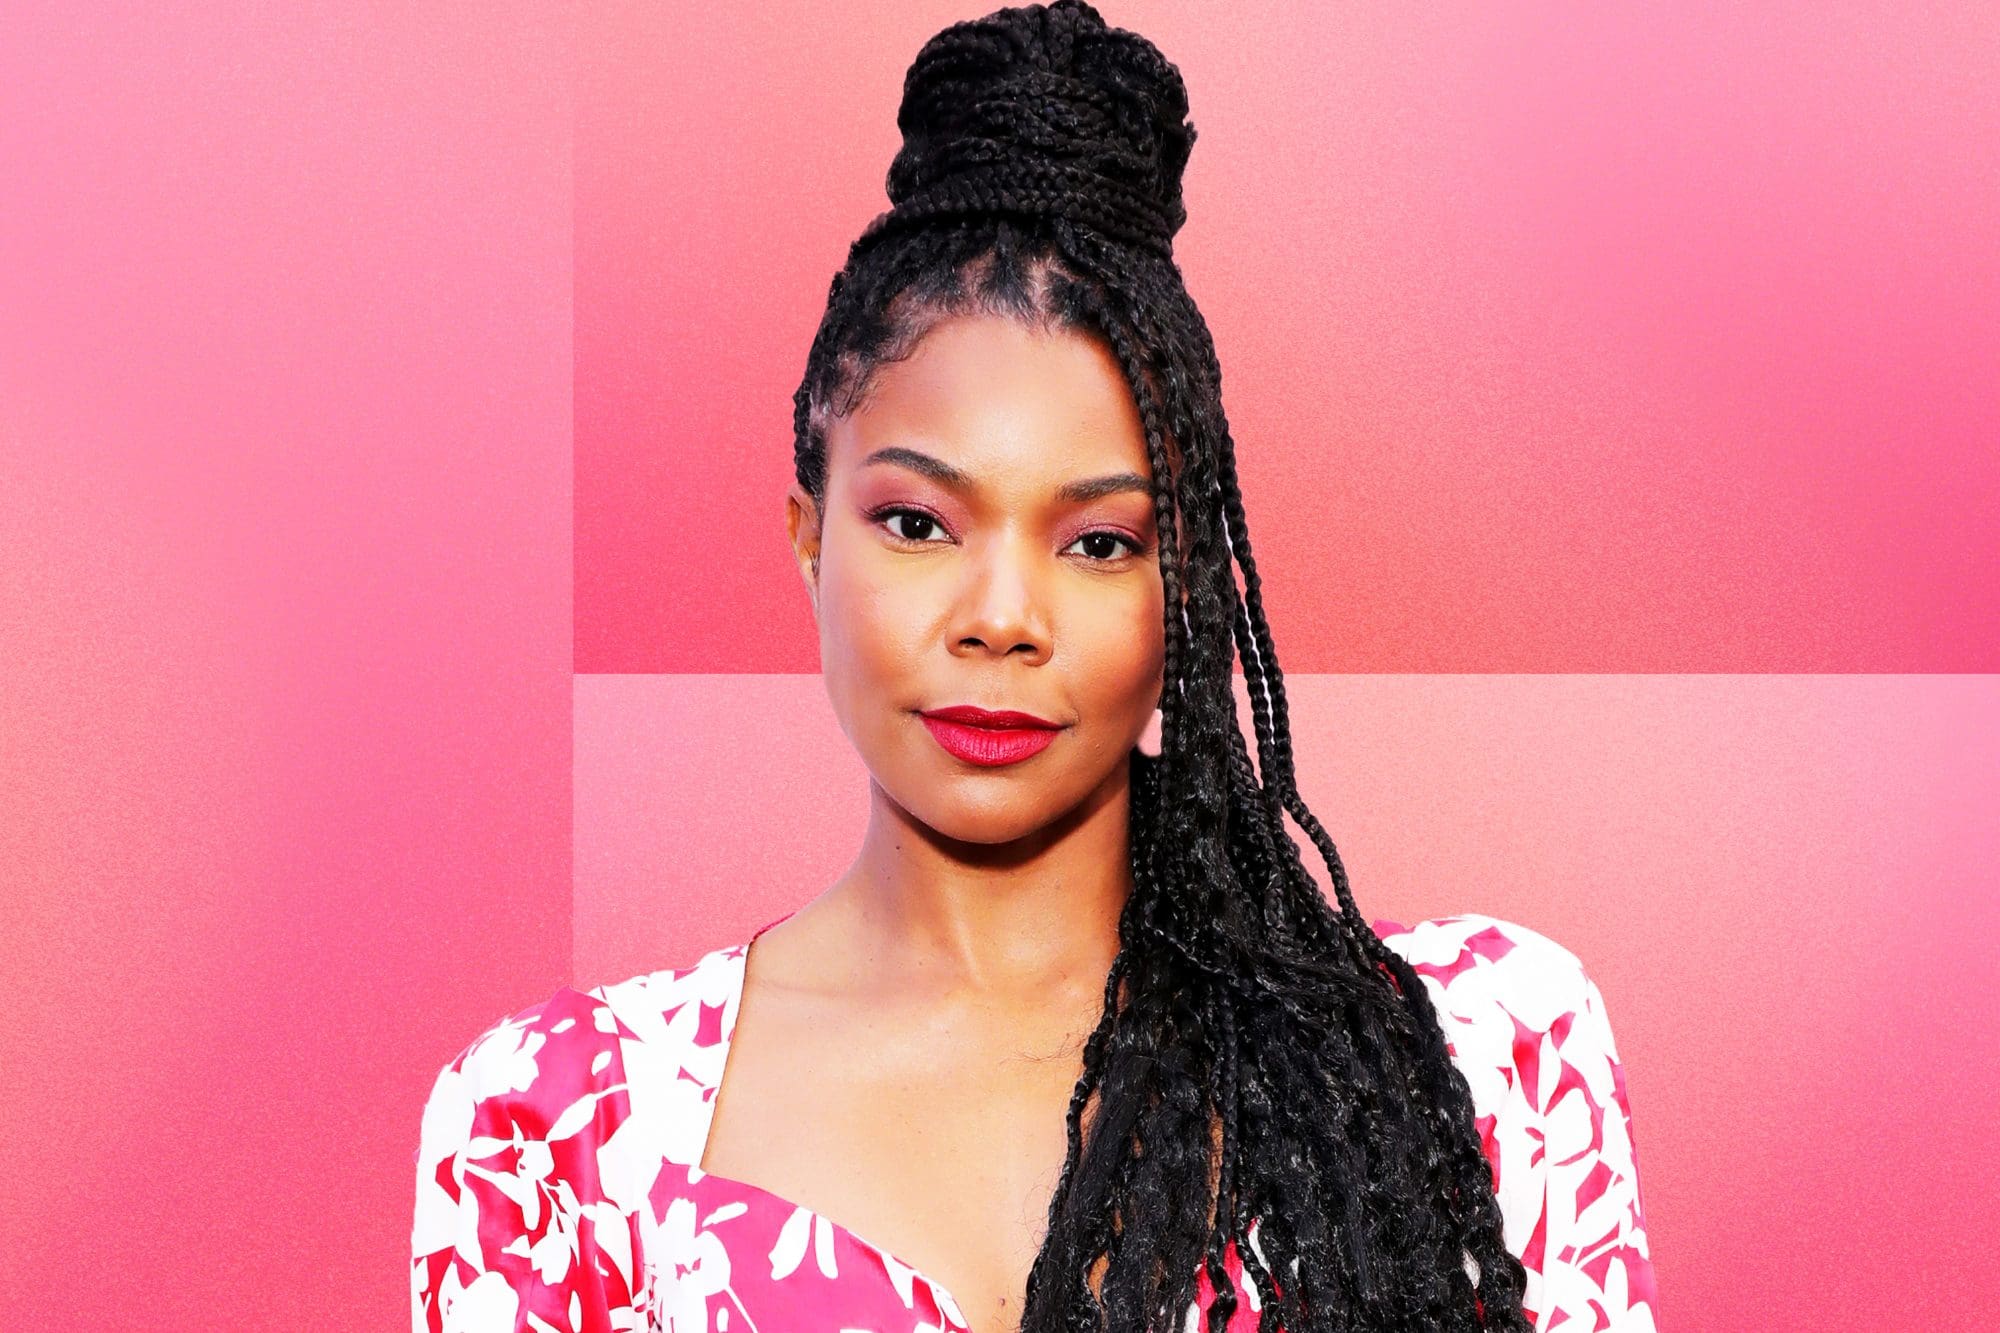 gabrielle-union-drops-juicy-beauty-advice-check-out-her-post-here